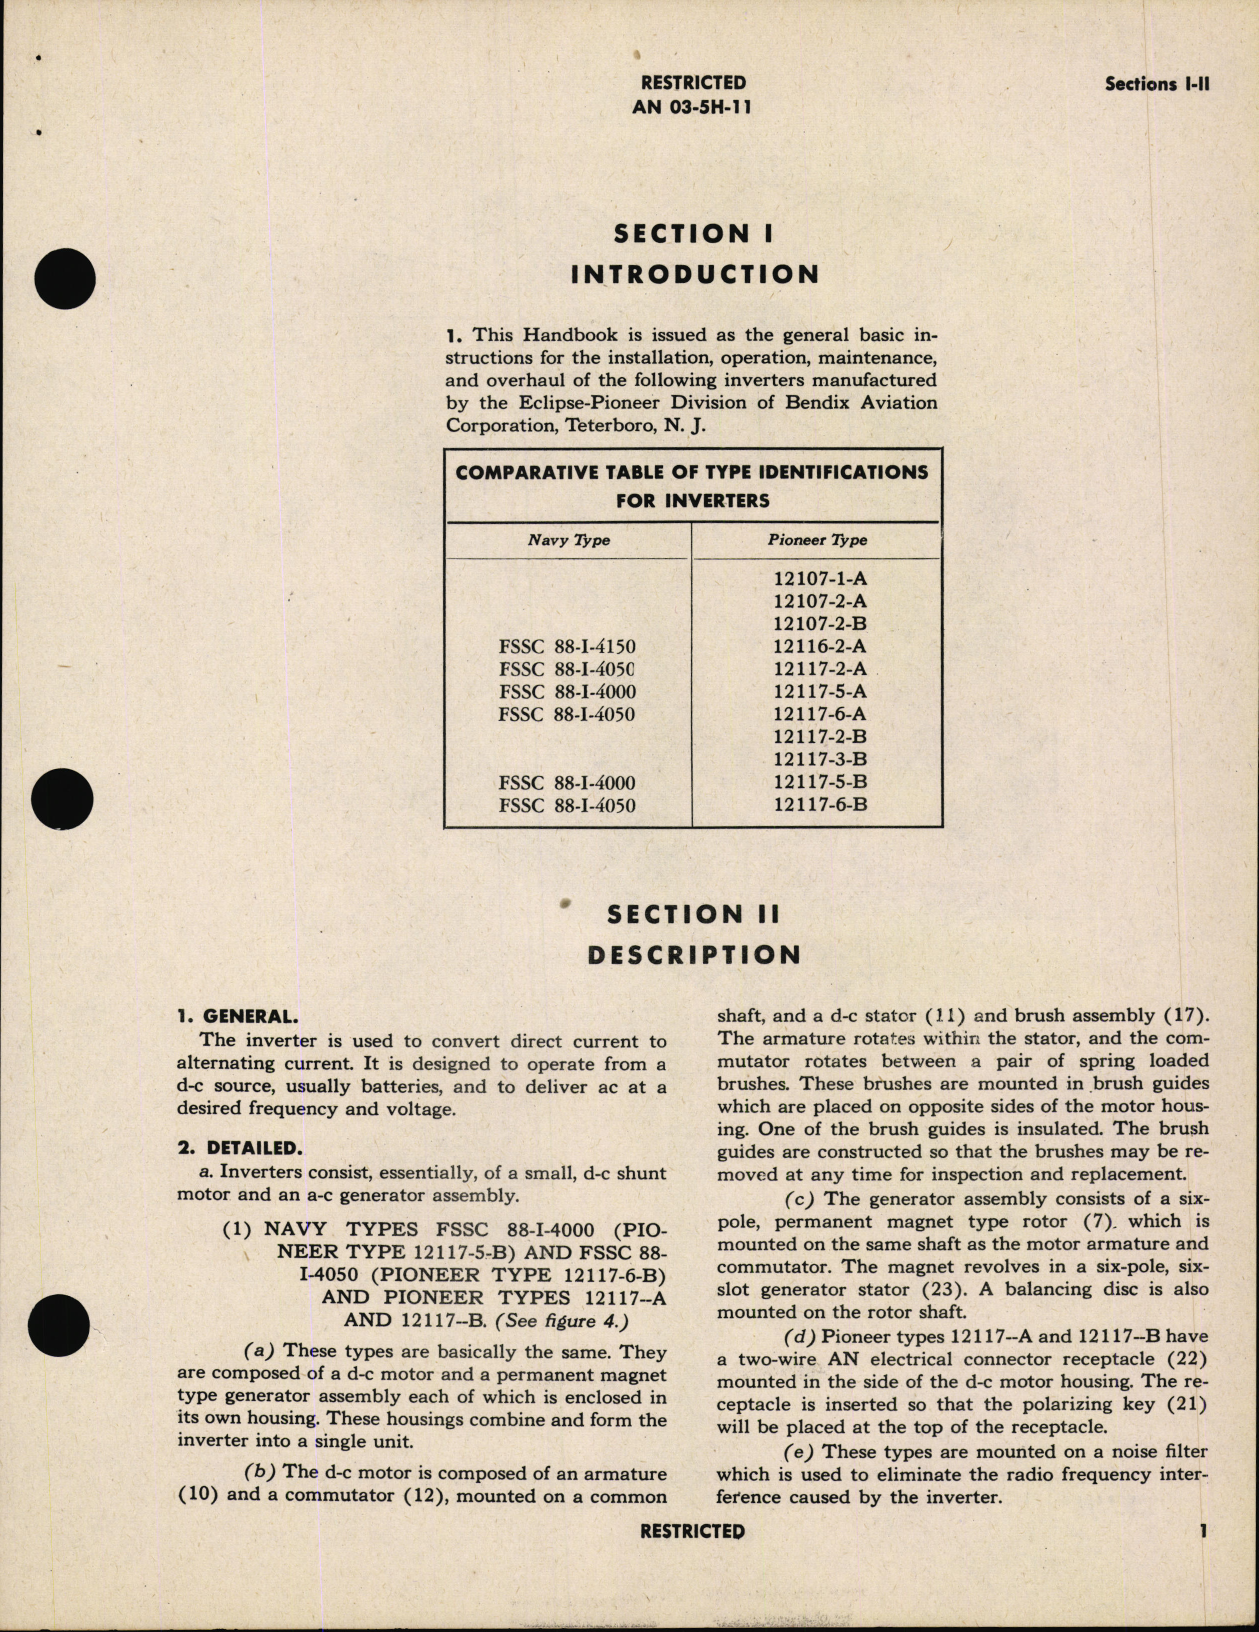 Sample page 5 from AirCorps Library document: Handbook of Instructions with Parts Catalog for Inverters